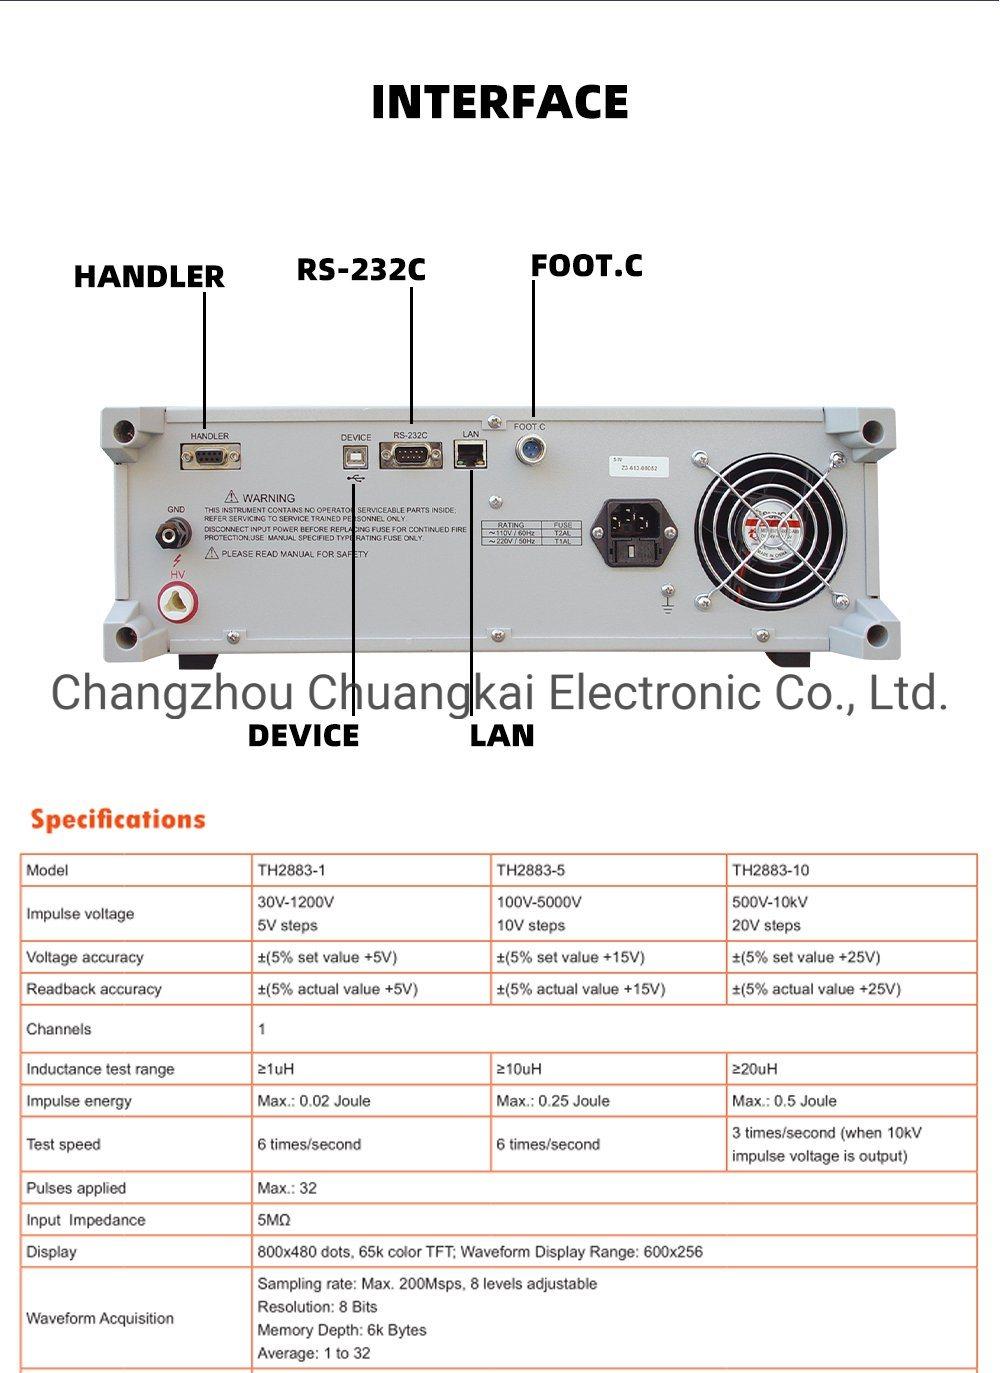 Th2883-10 Impulse Winding Tester 20mh Inductance Impulse Voltage Output 500-10kv